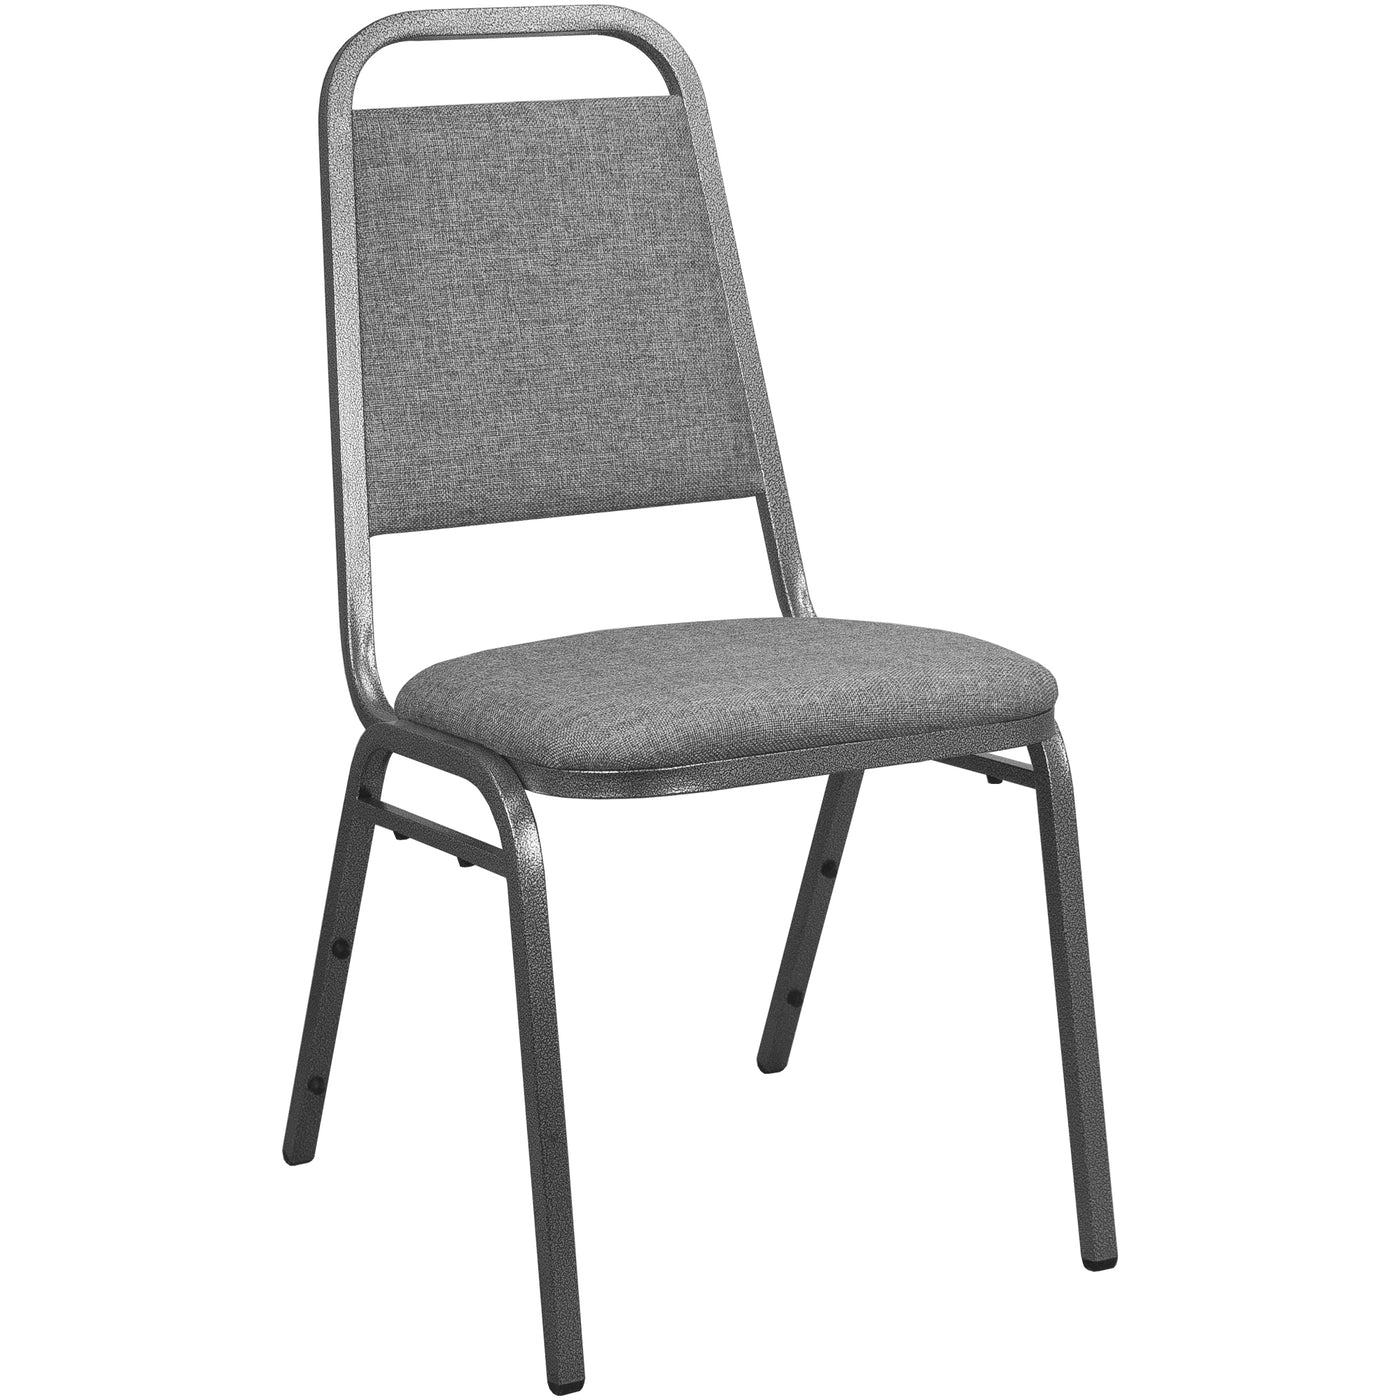 Charcoal Fabric Banquet Chair